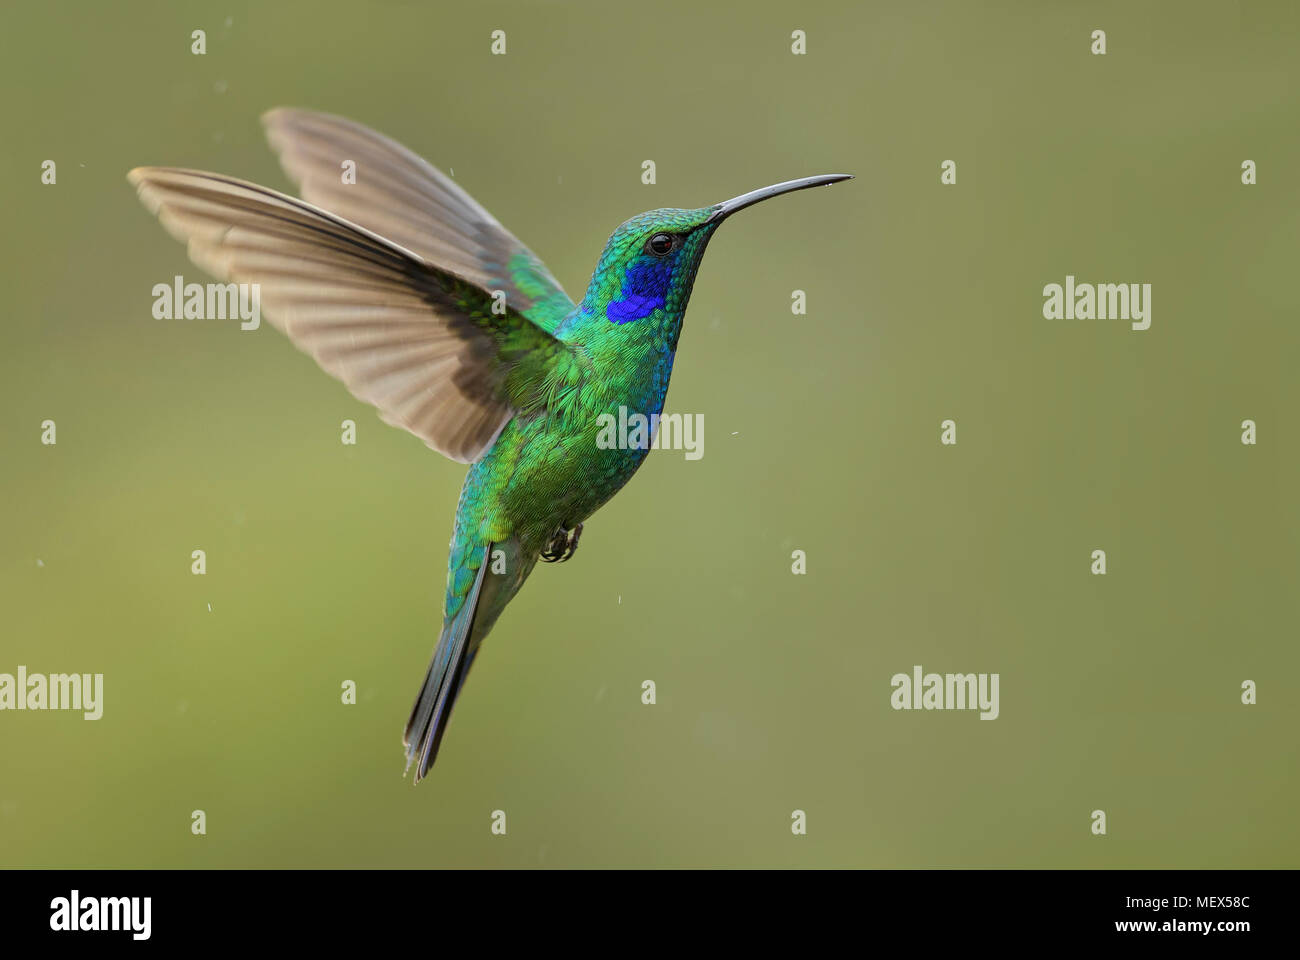 Green Violet-ear - Colibri thalassinus, beautiful green hummingbird from Central America forests, Costa Rica. Stock Photo